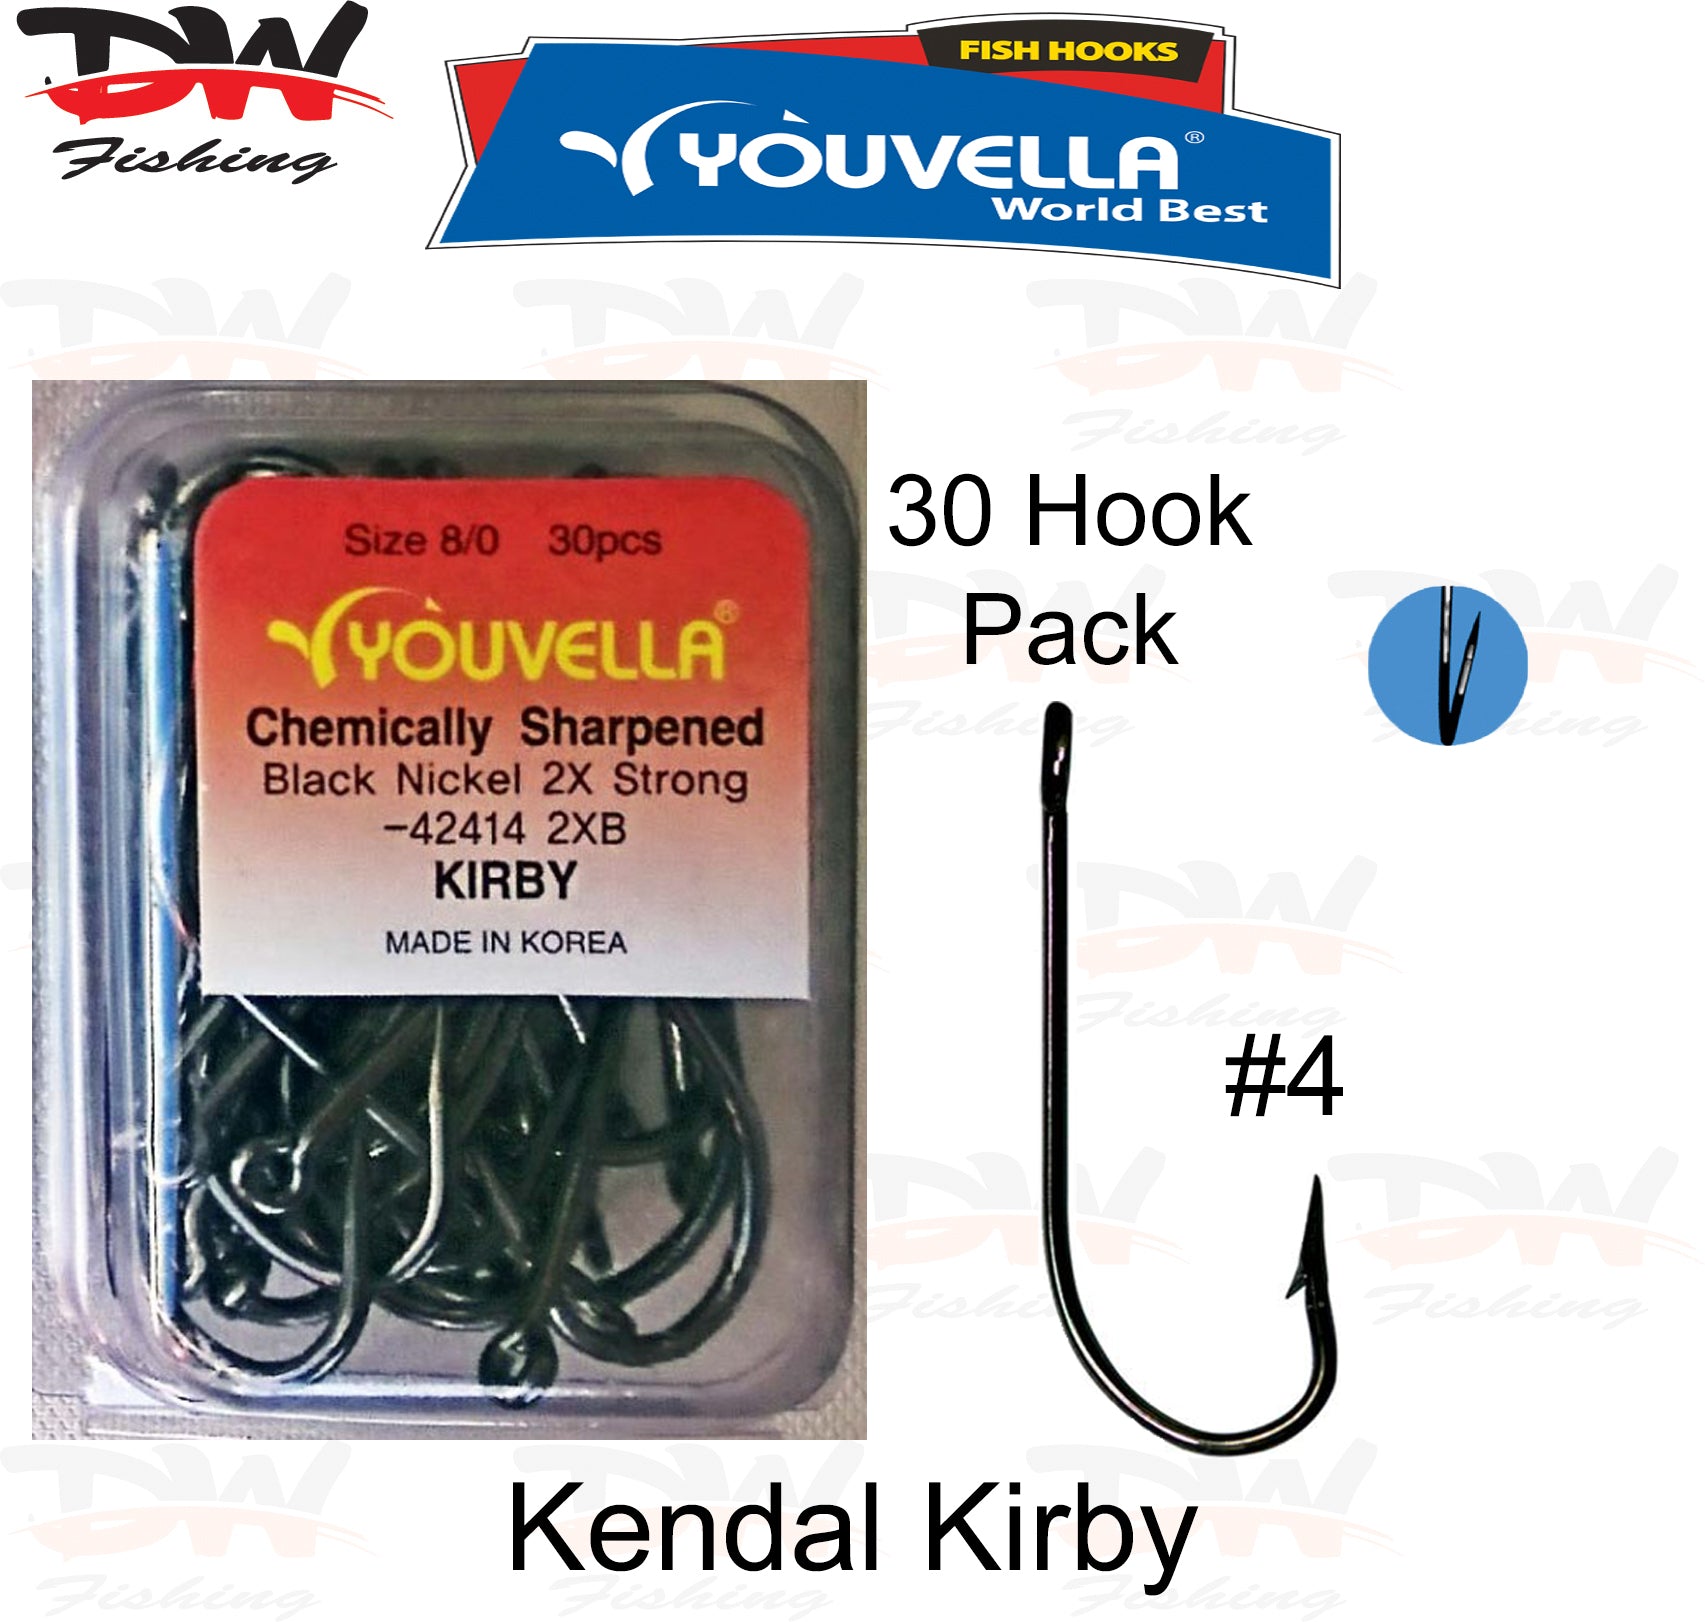 Youvella Kendal Kirby size #4 fish hook 30 pack